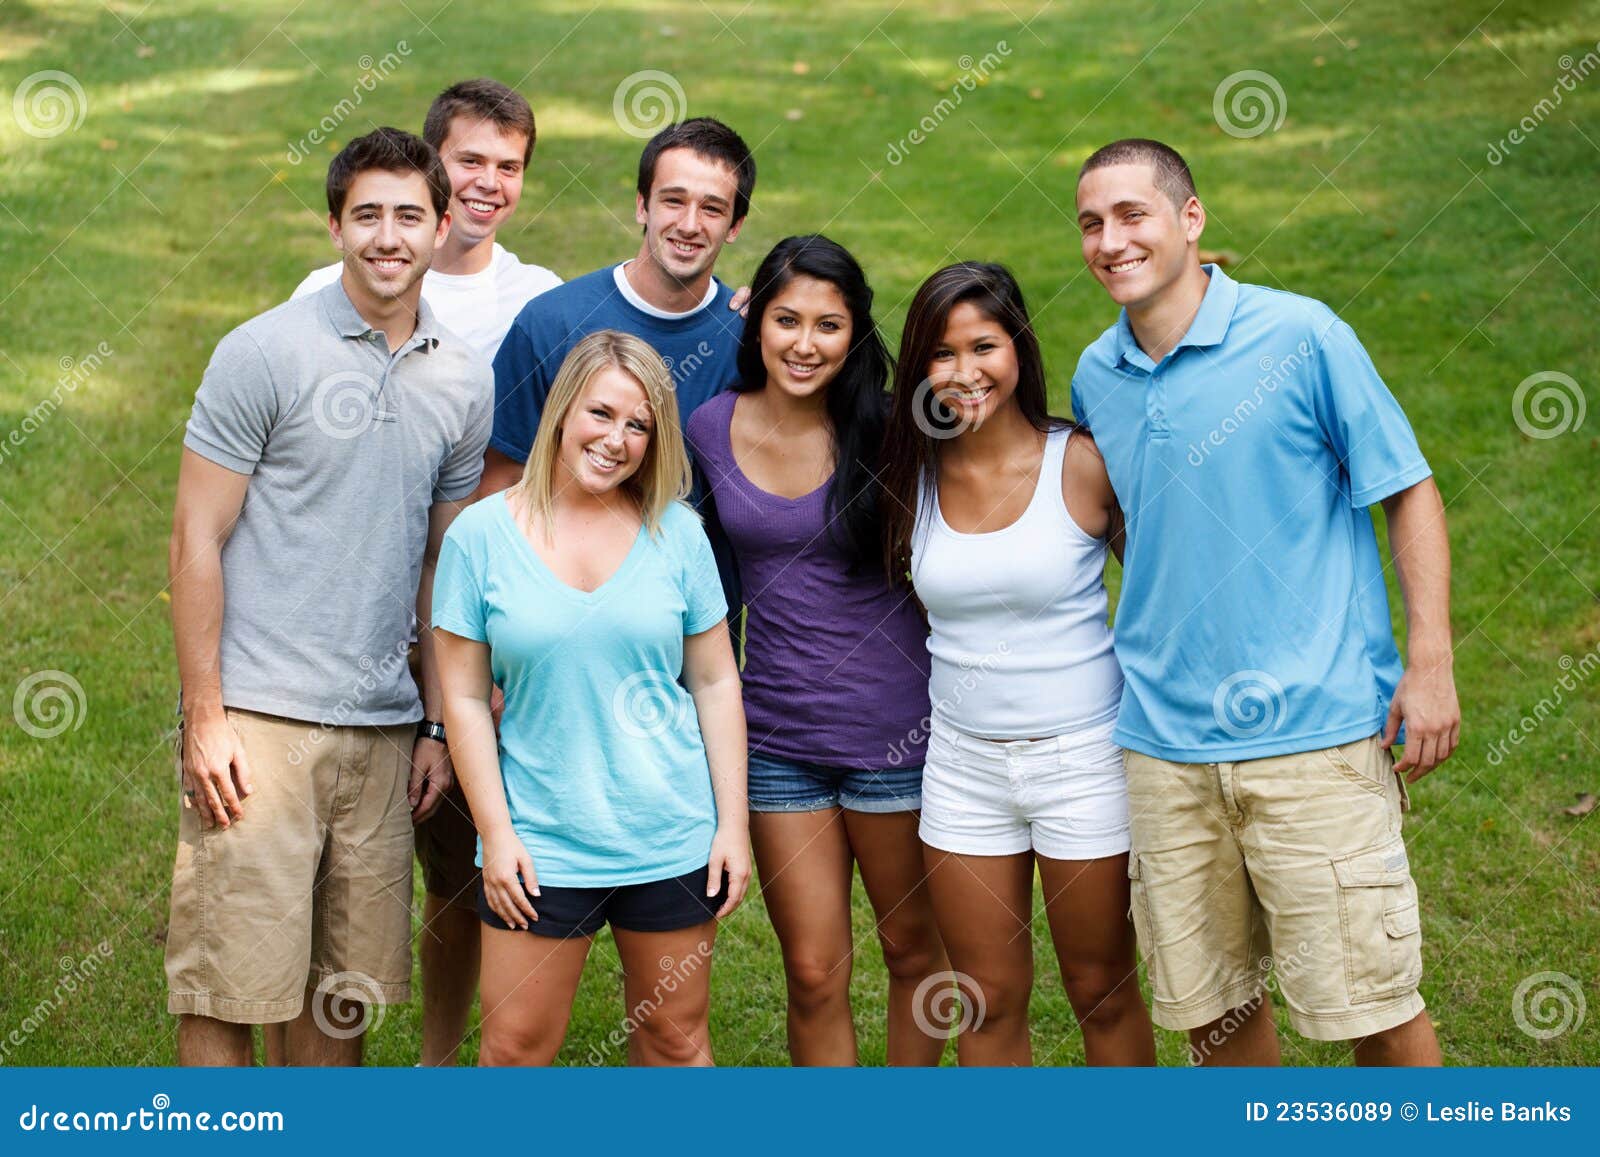 Diverse Group Of Friends 102